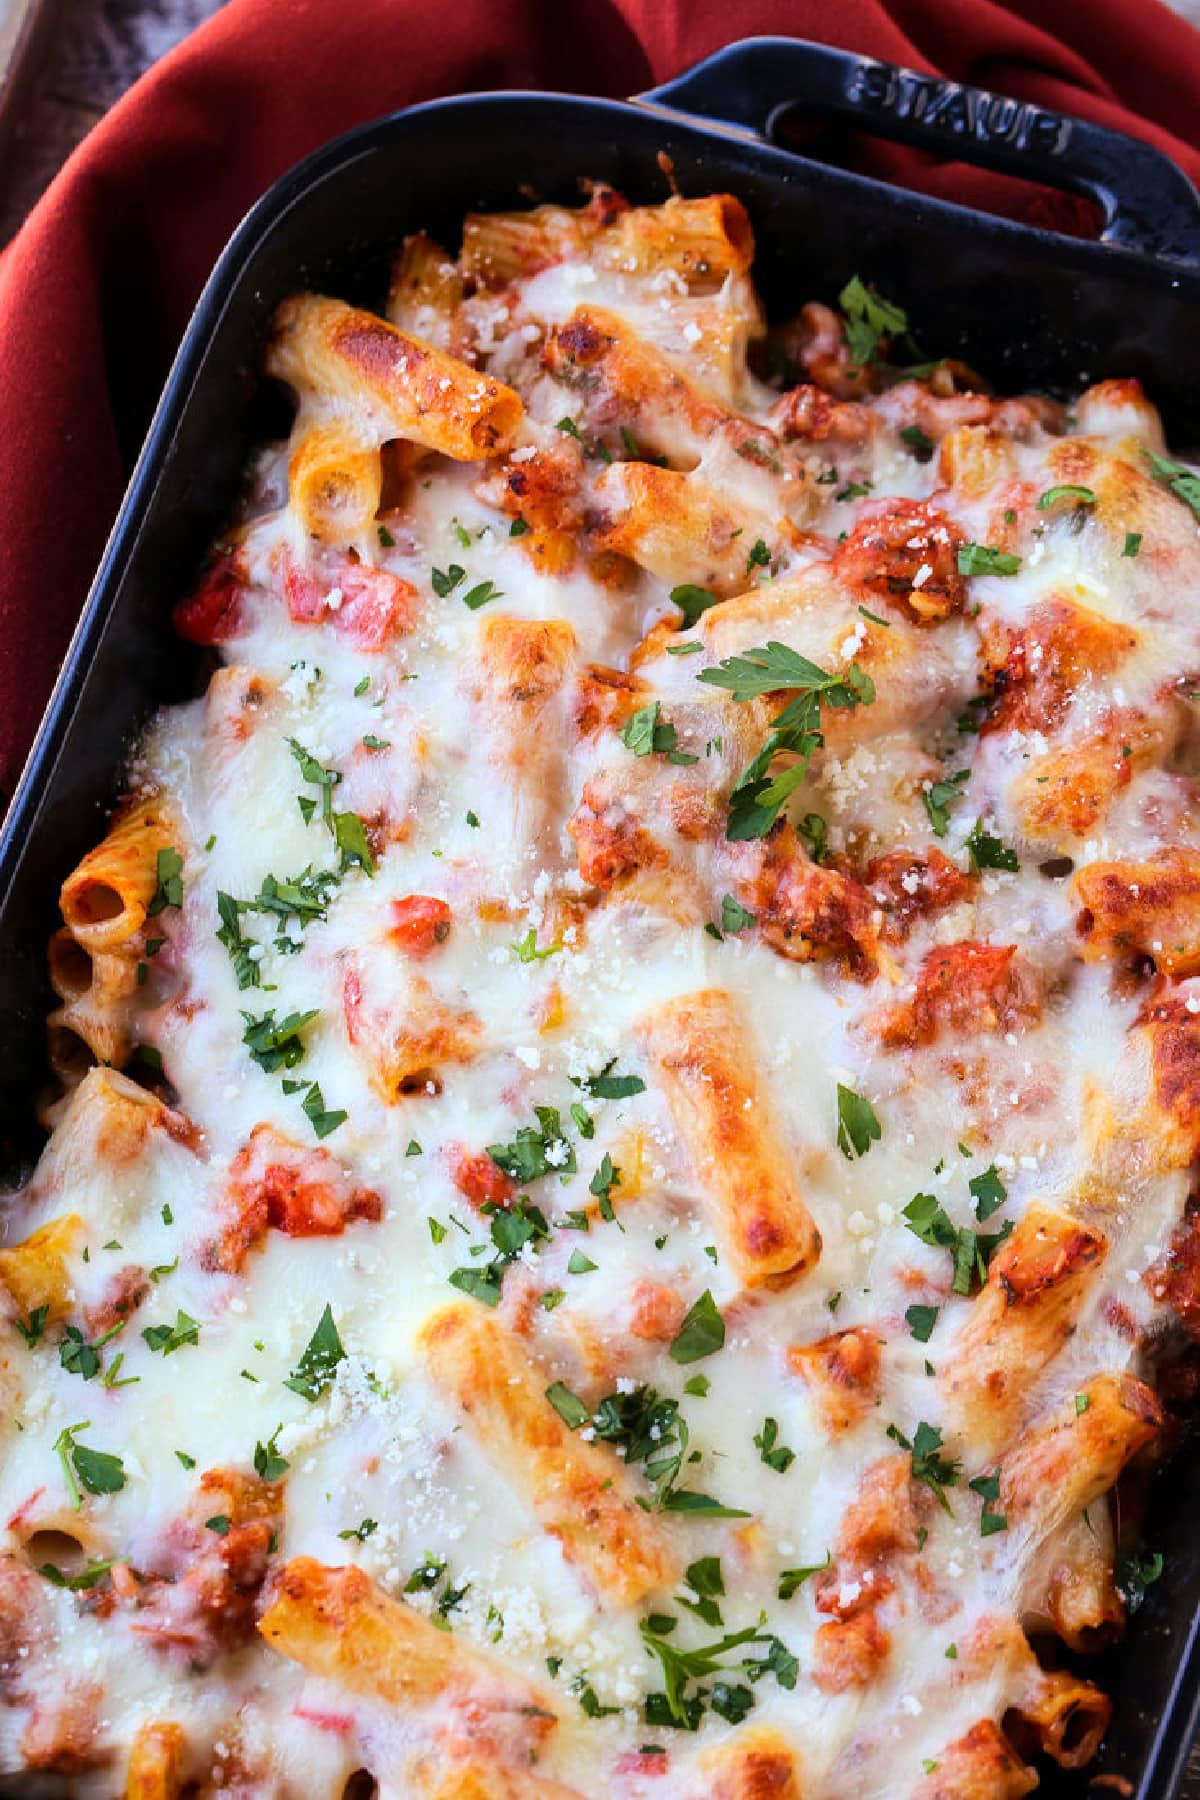 baked ziti with sausage and peppers in casserole dish